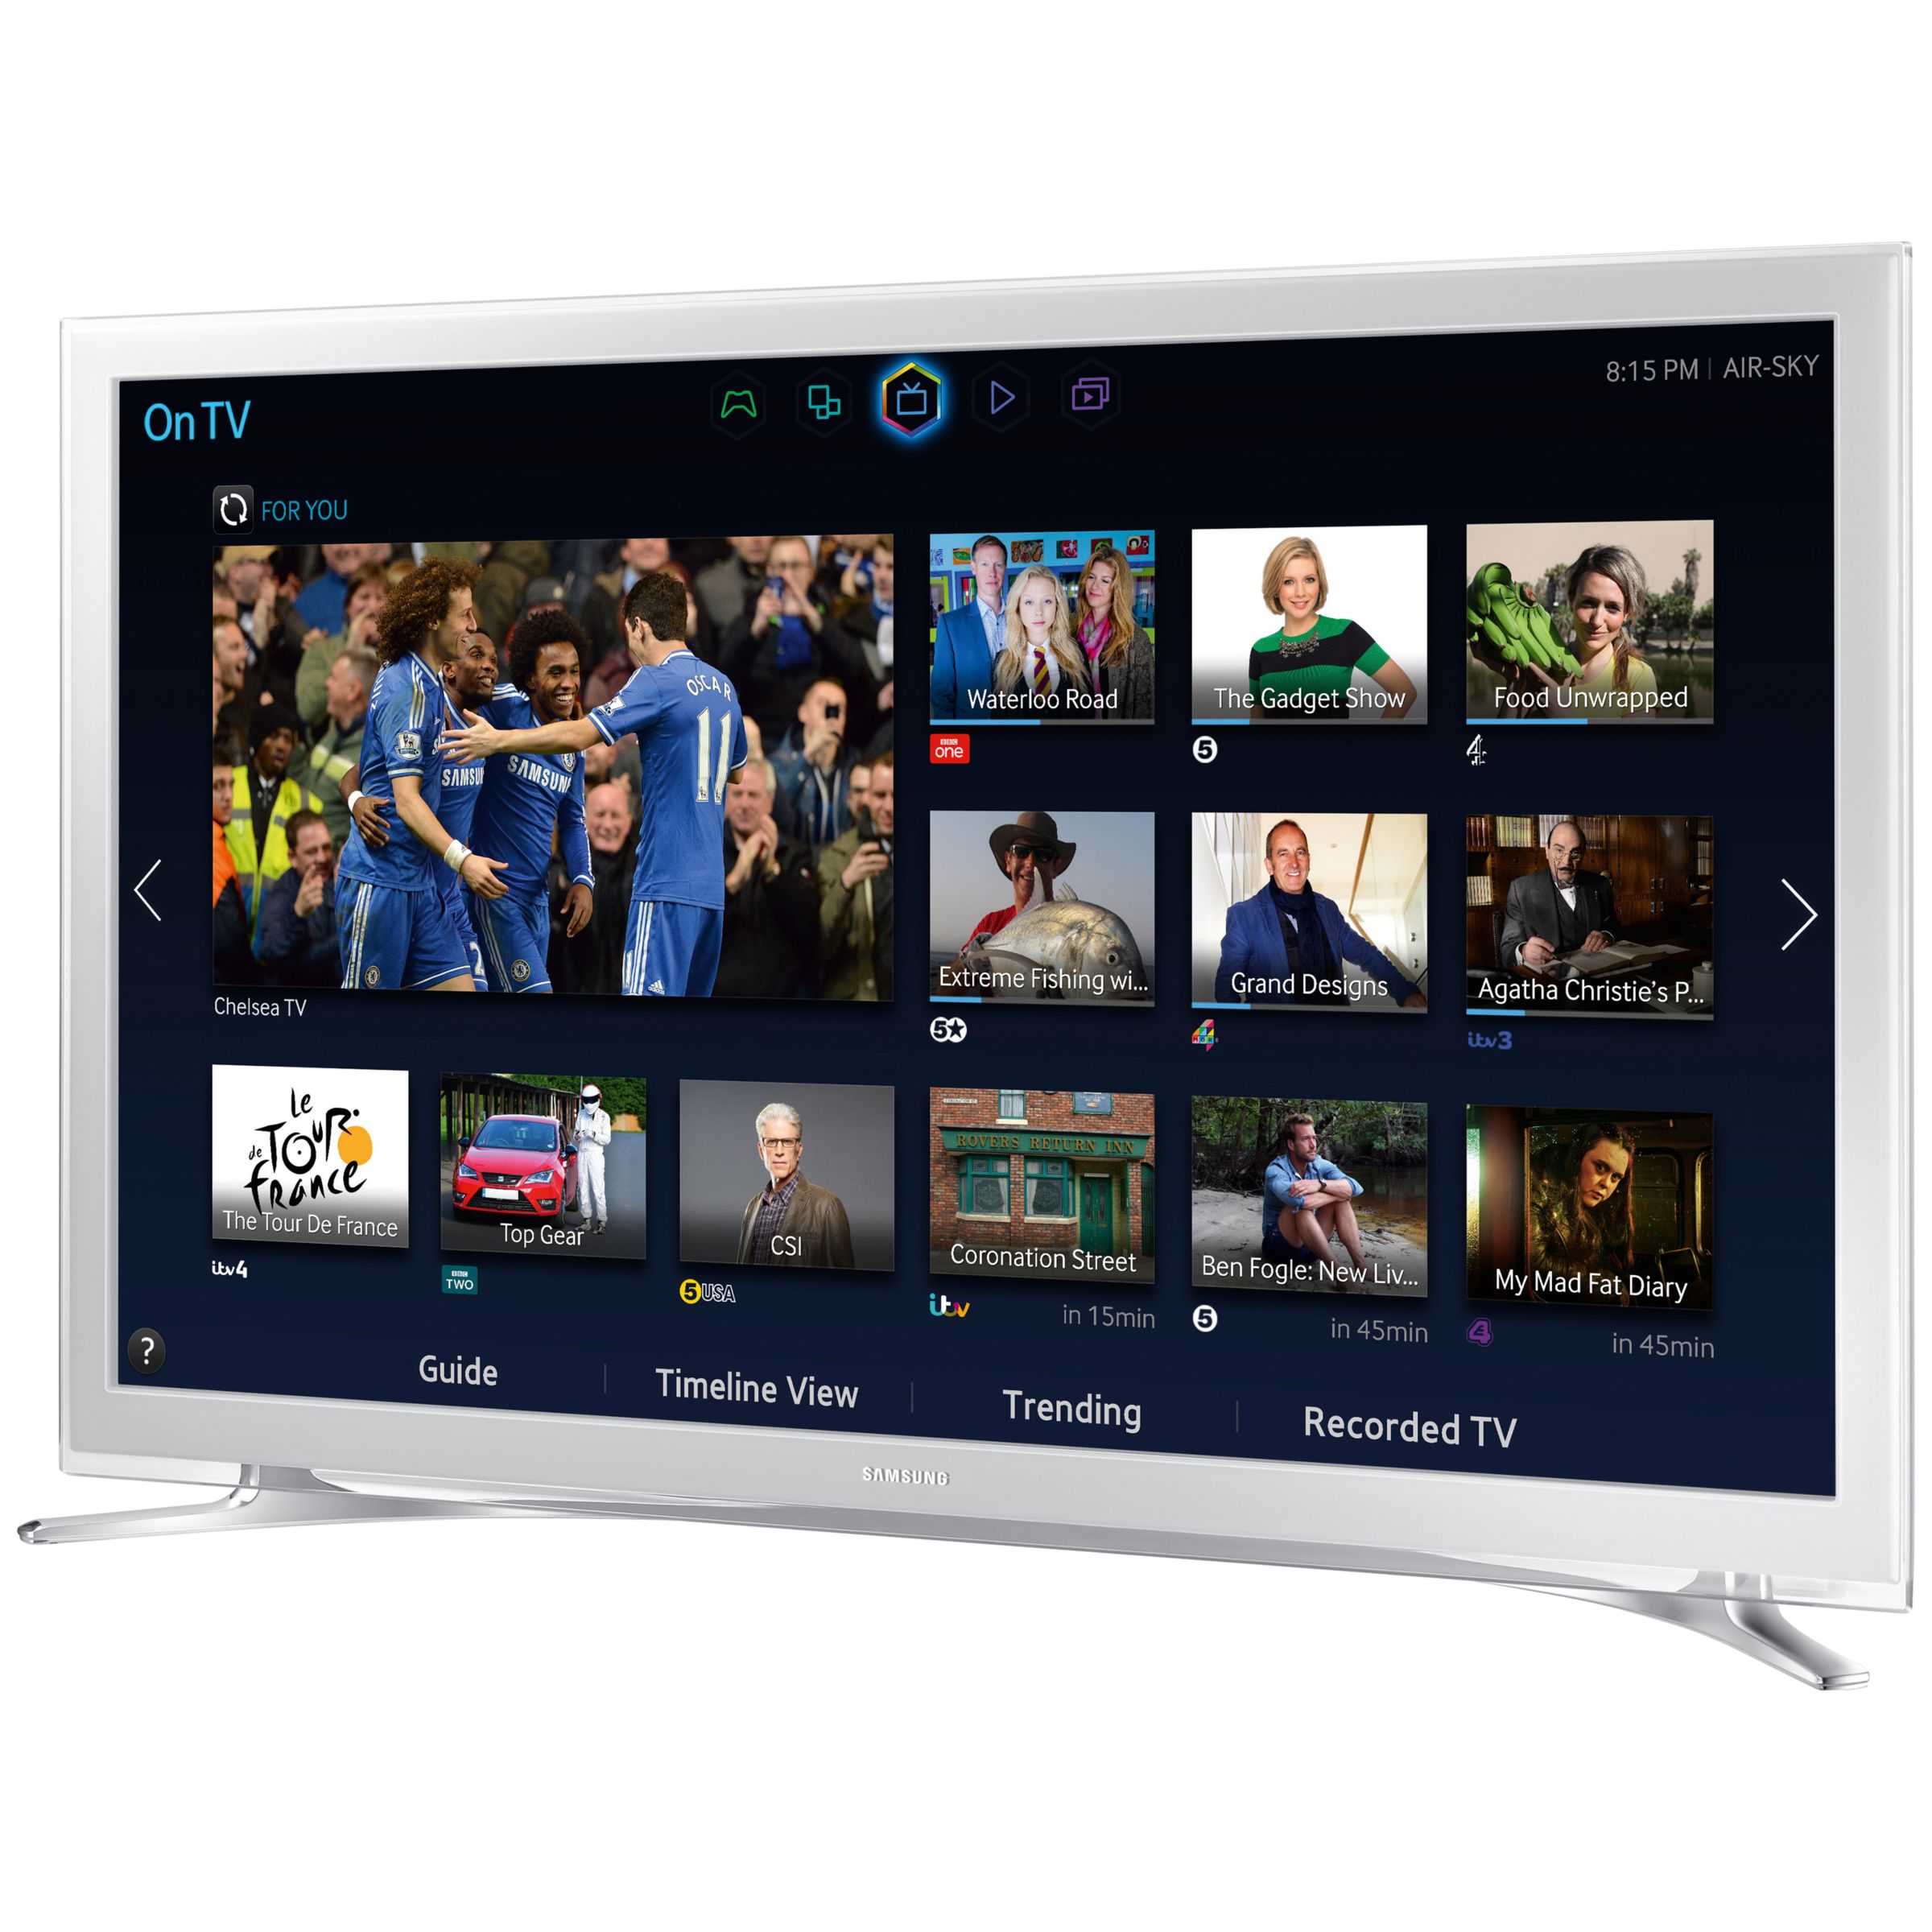 Samsung UE32H4500 LED HD Smart TV, 32" with Freeview HD, White